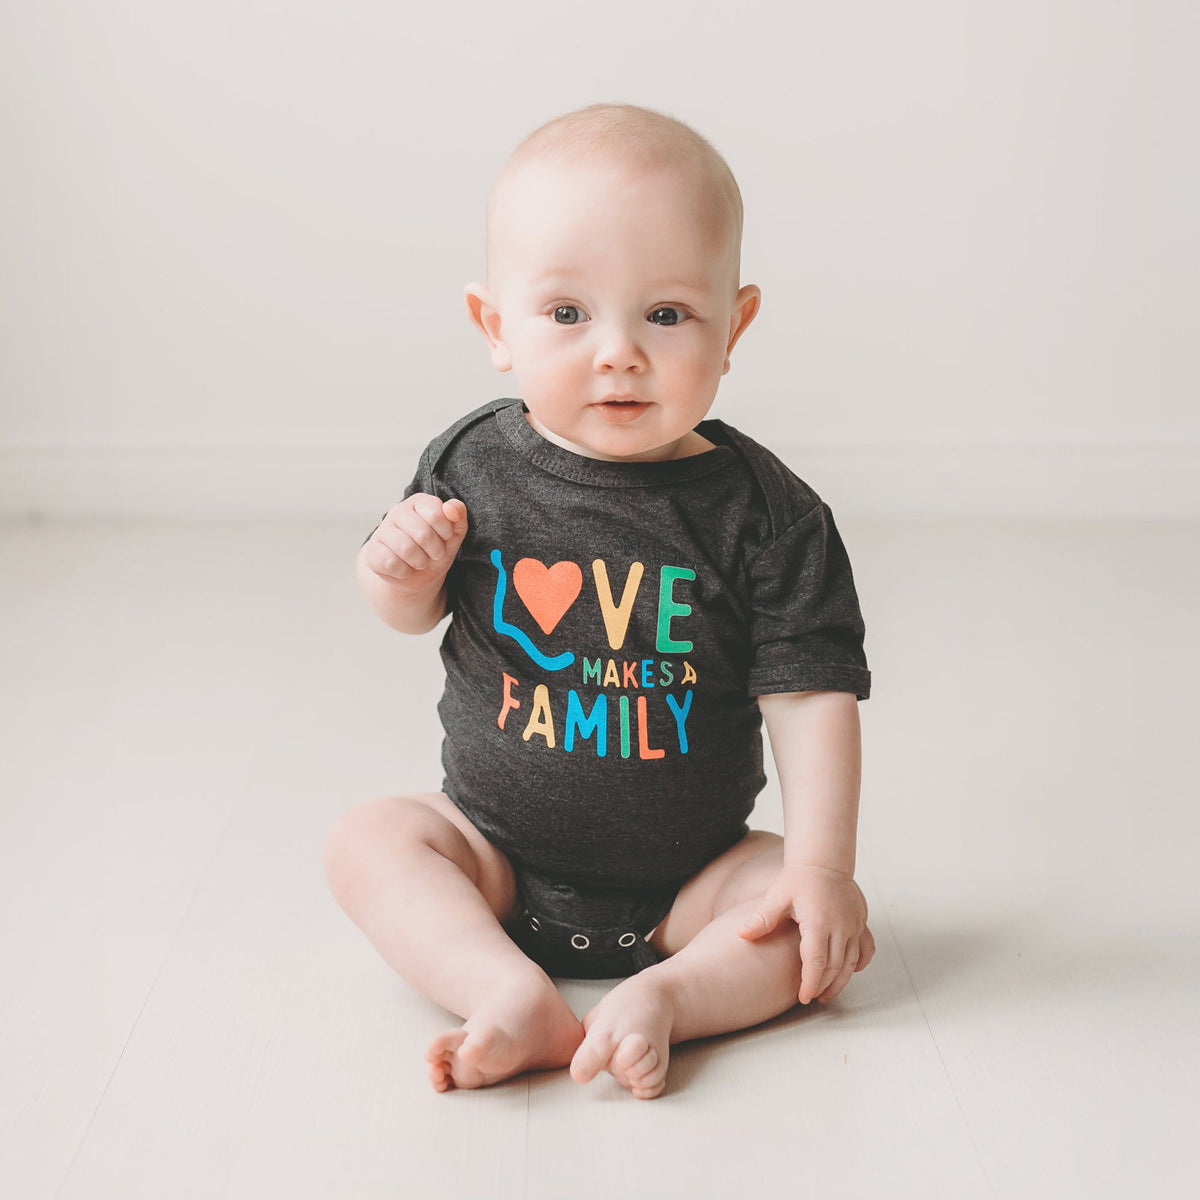 Love Makes a Family baby bodysuit / onesie - Sweetpea and Co.